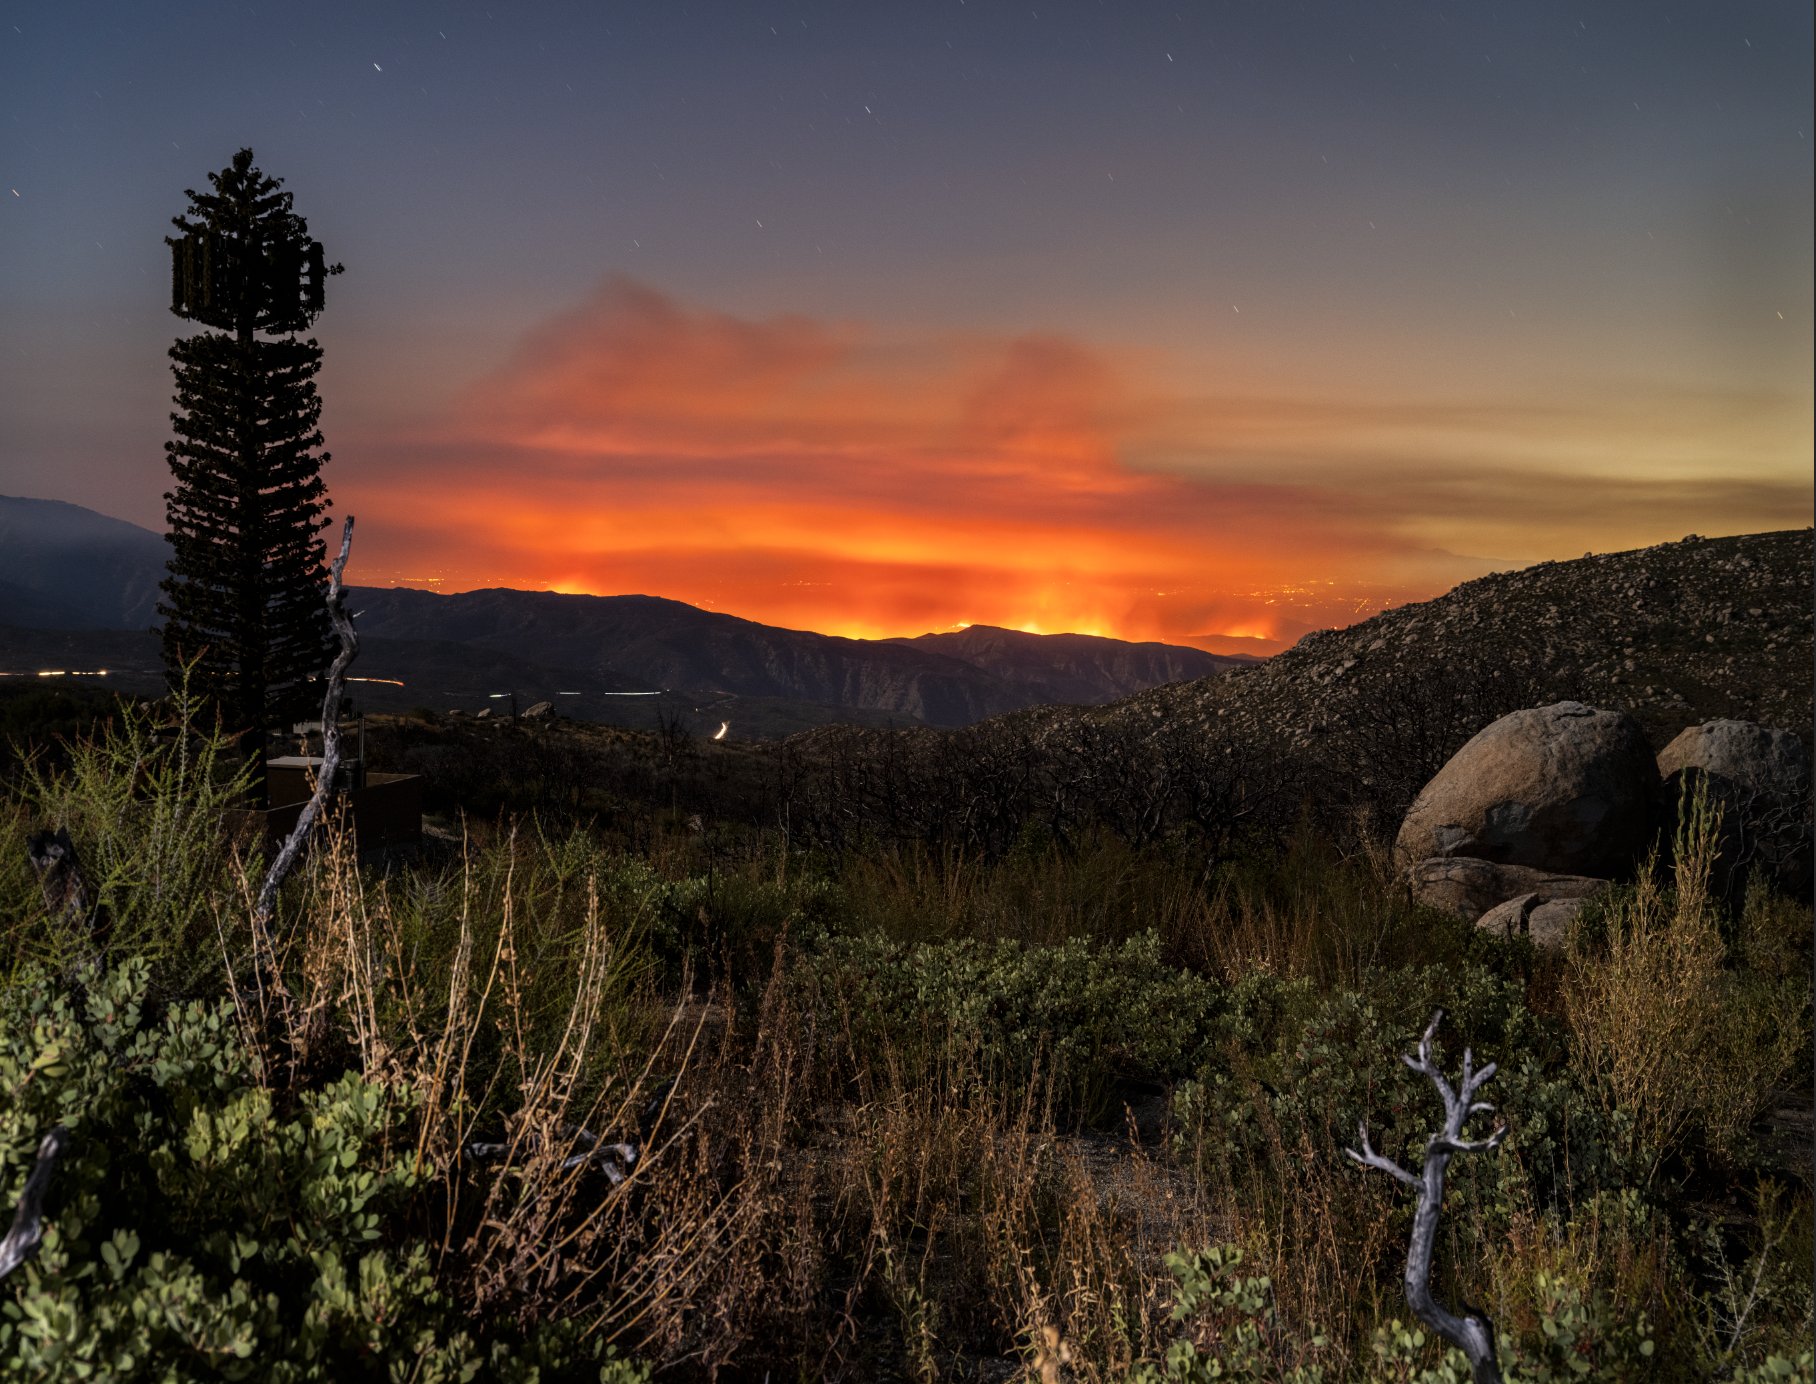 Stuart Palley's Photo of a Wildfire in California